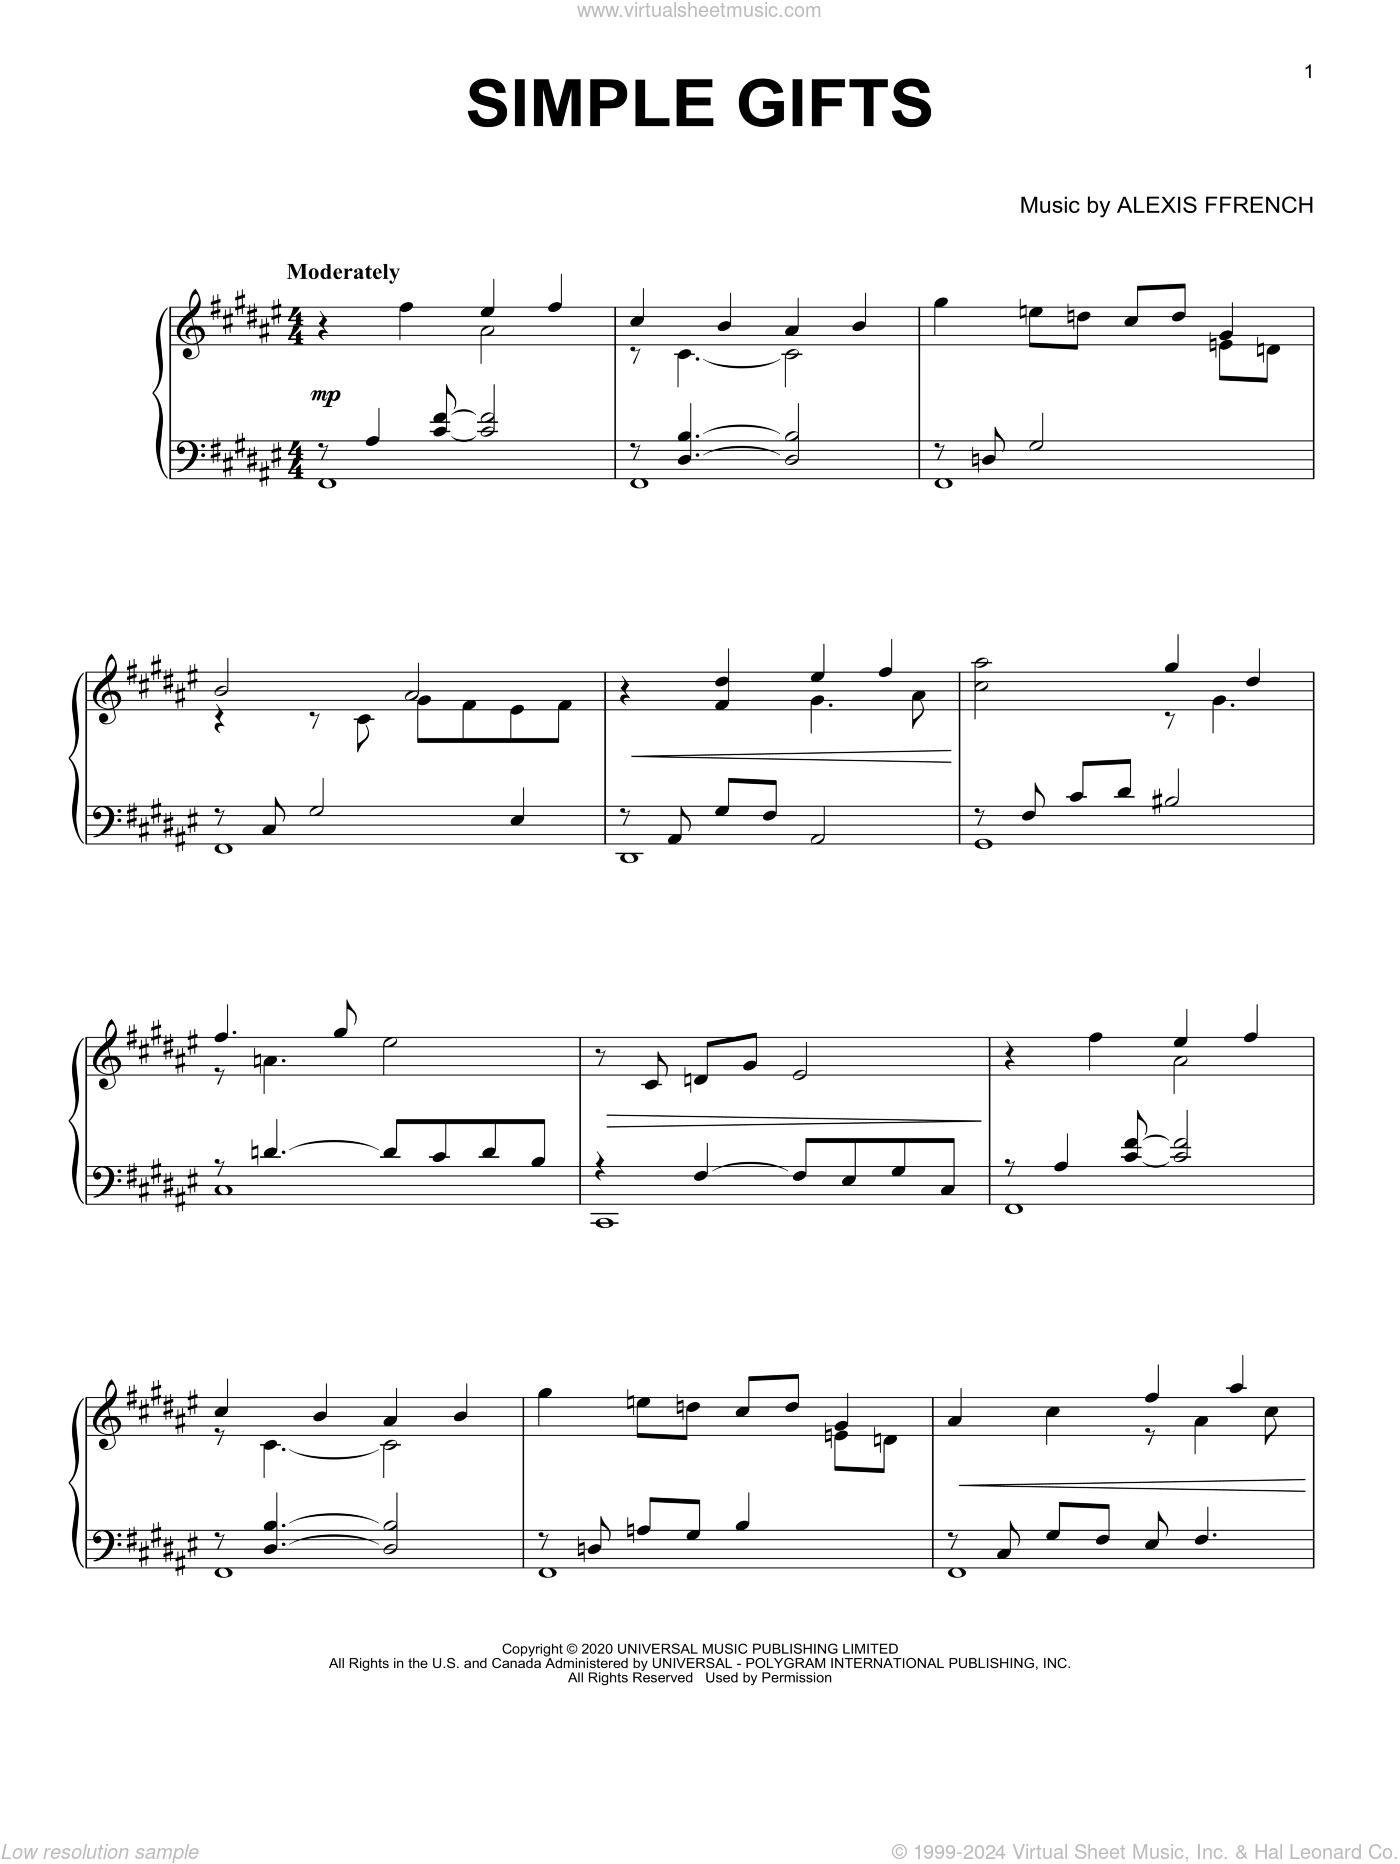 Simple Gifts, free easy hymn sheet music for piano with lyrics